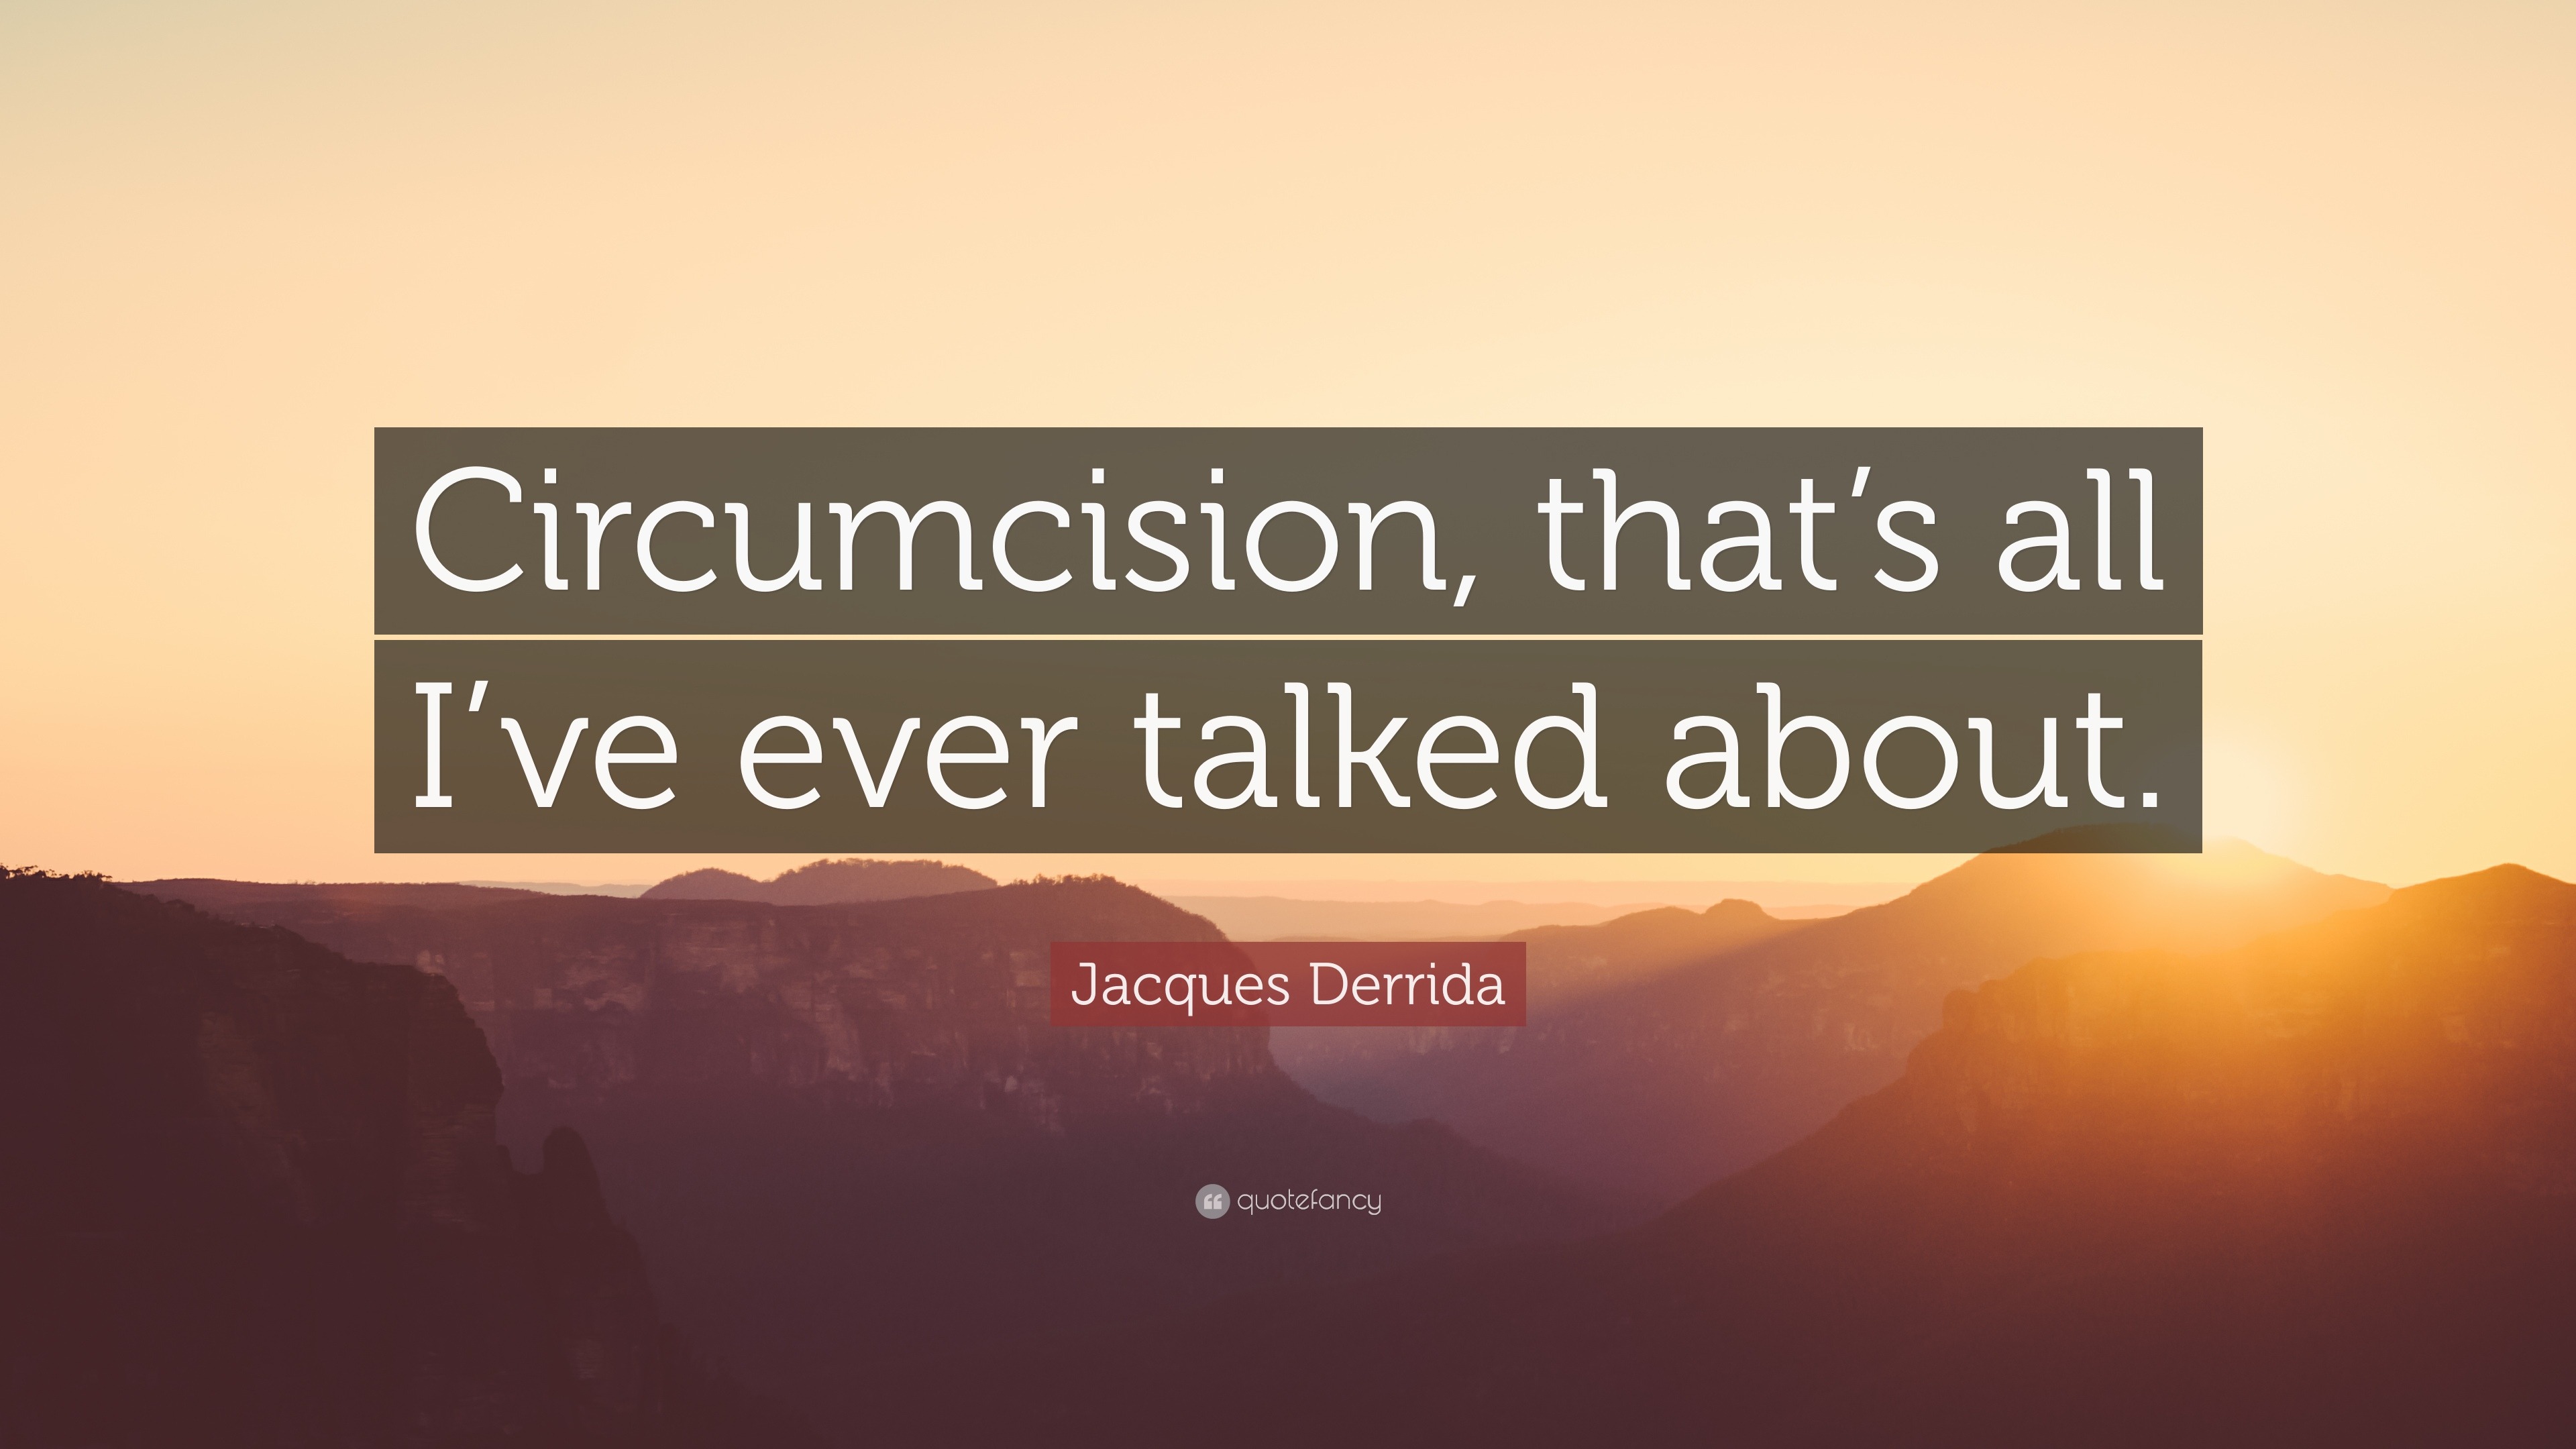 Circumcision, that’s all I’ve ever talked about. 